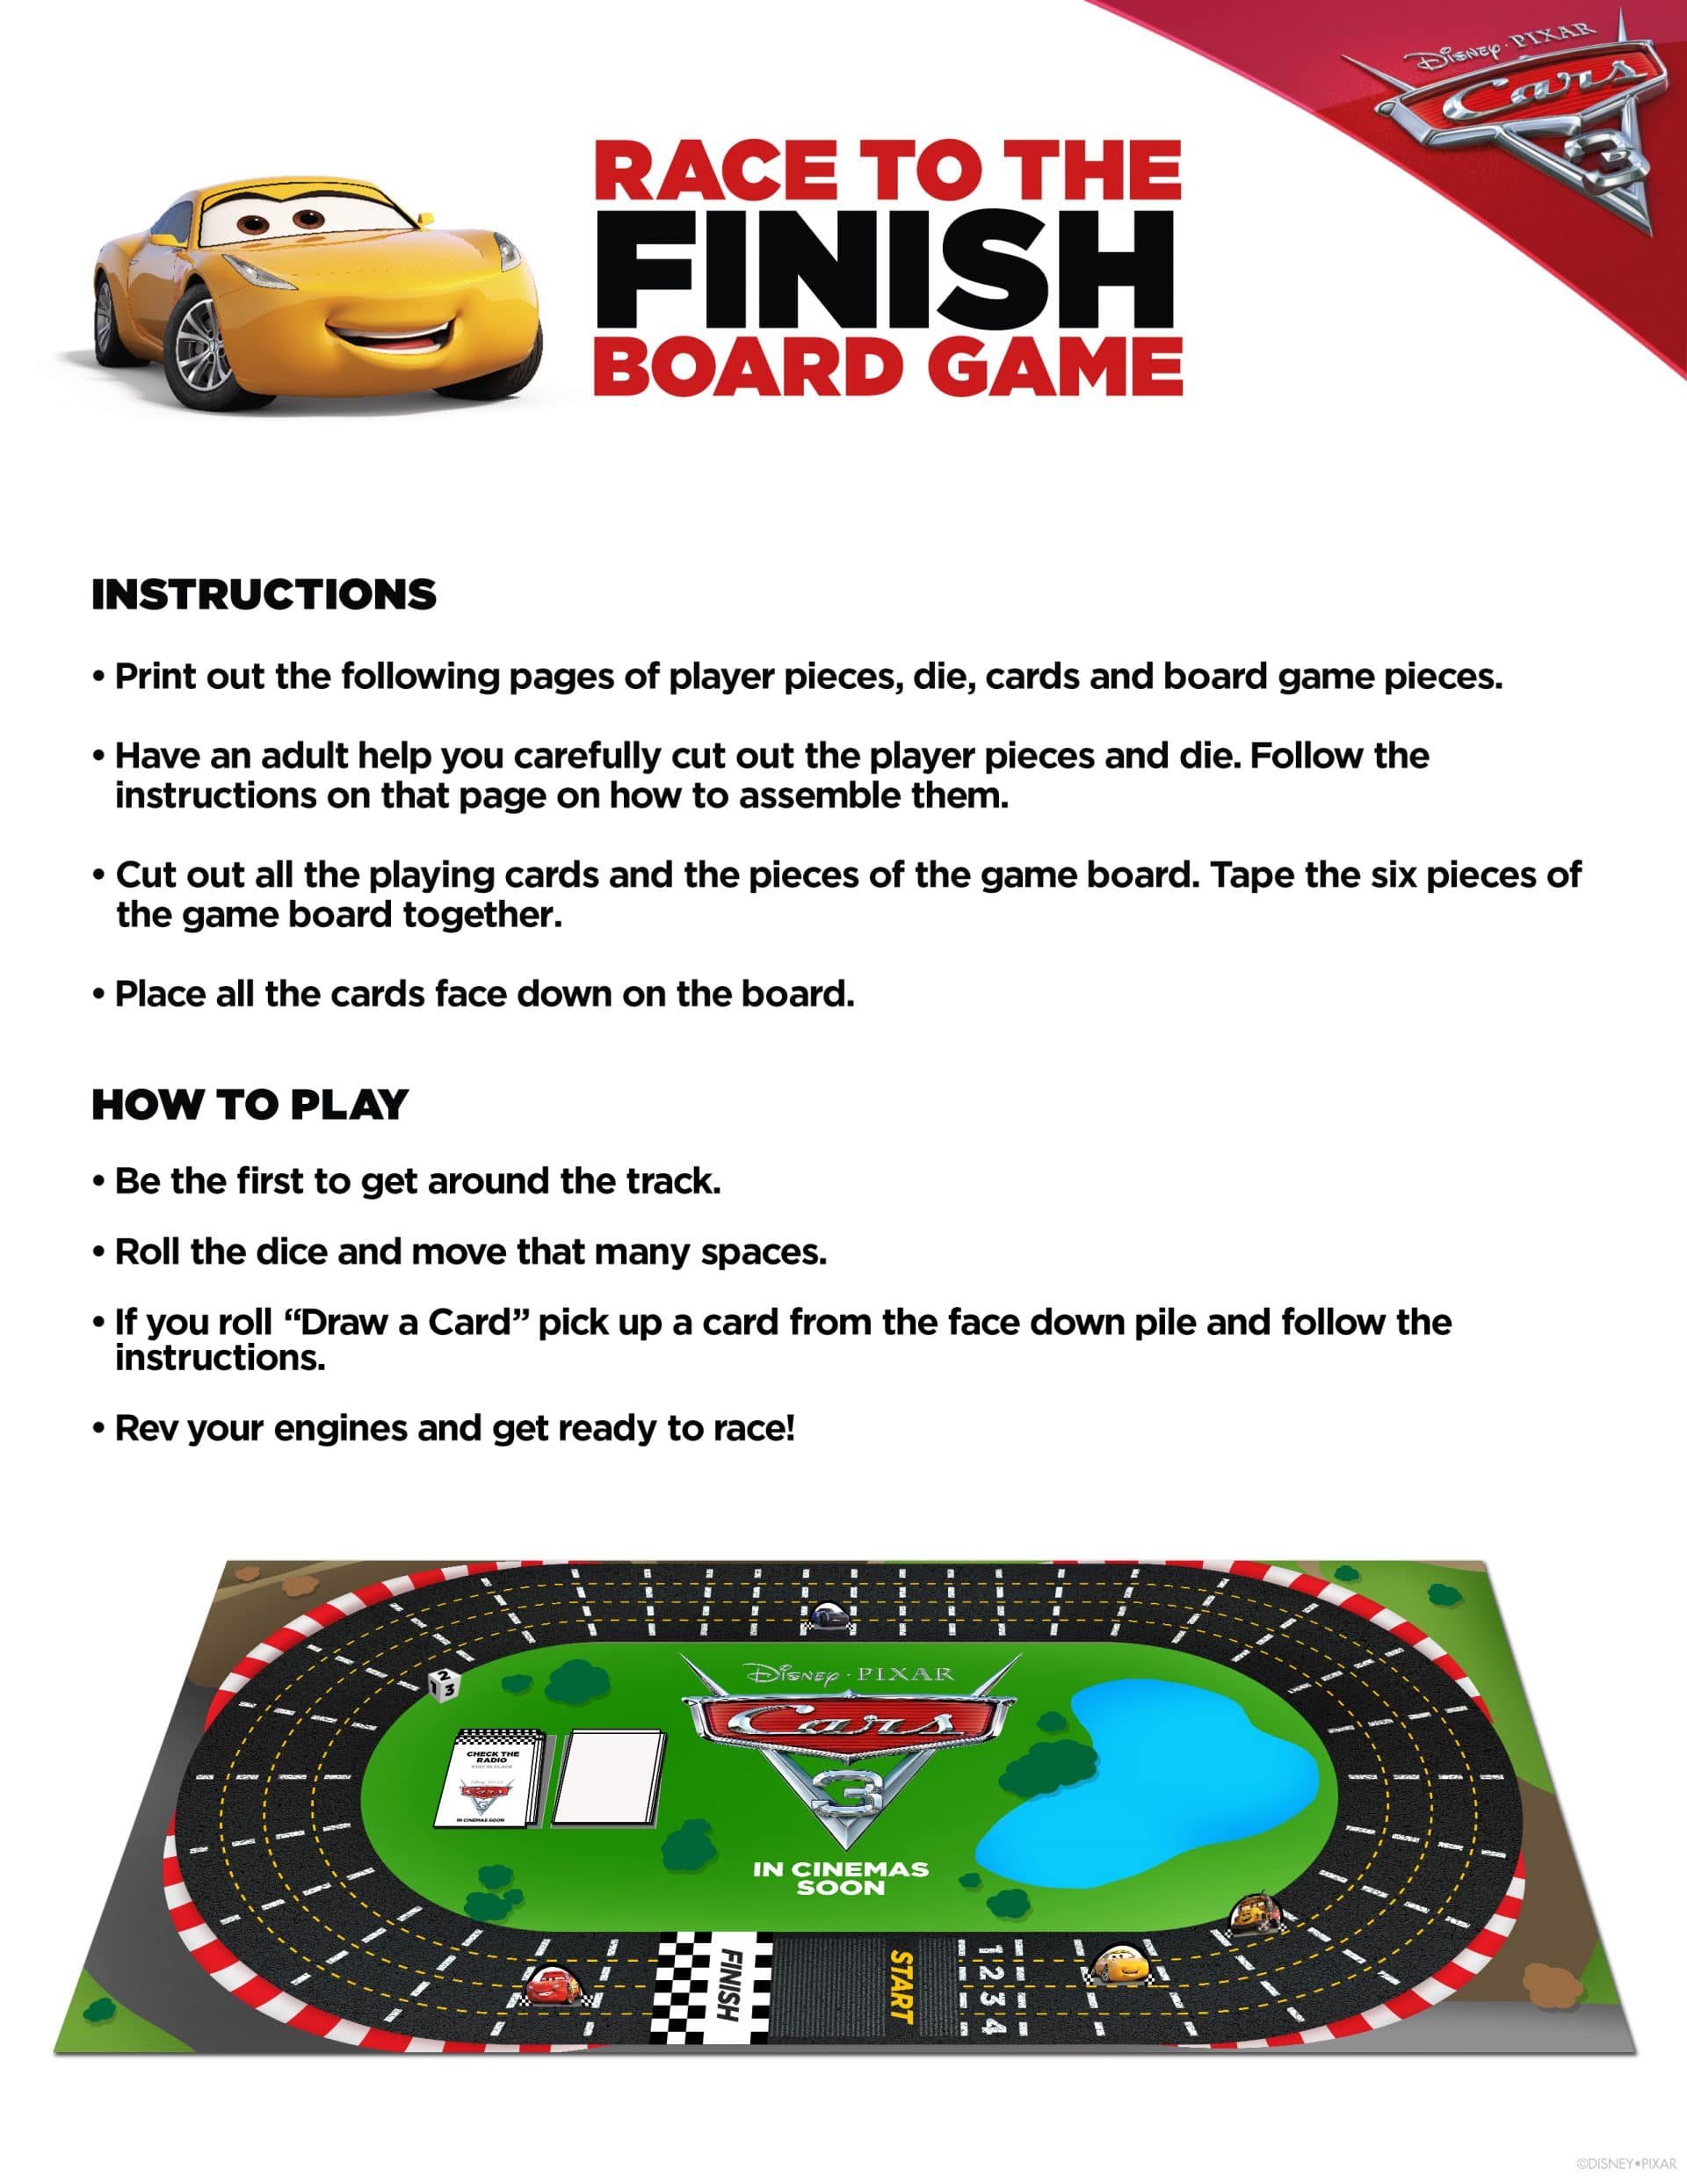 Cars 3 Activity Sheet - Race to the Finish Board Game